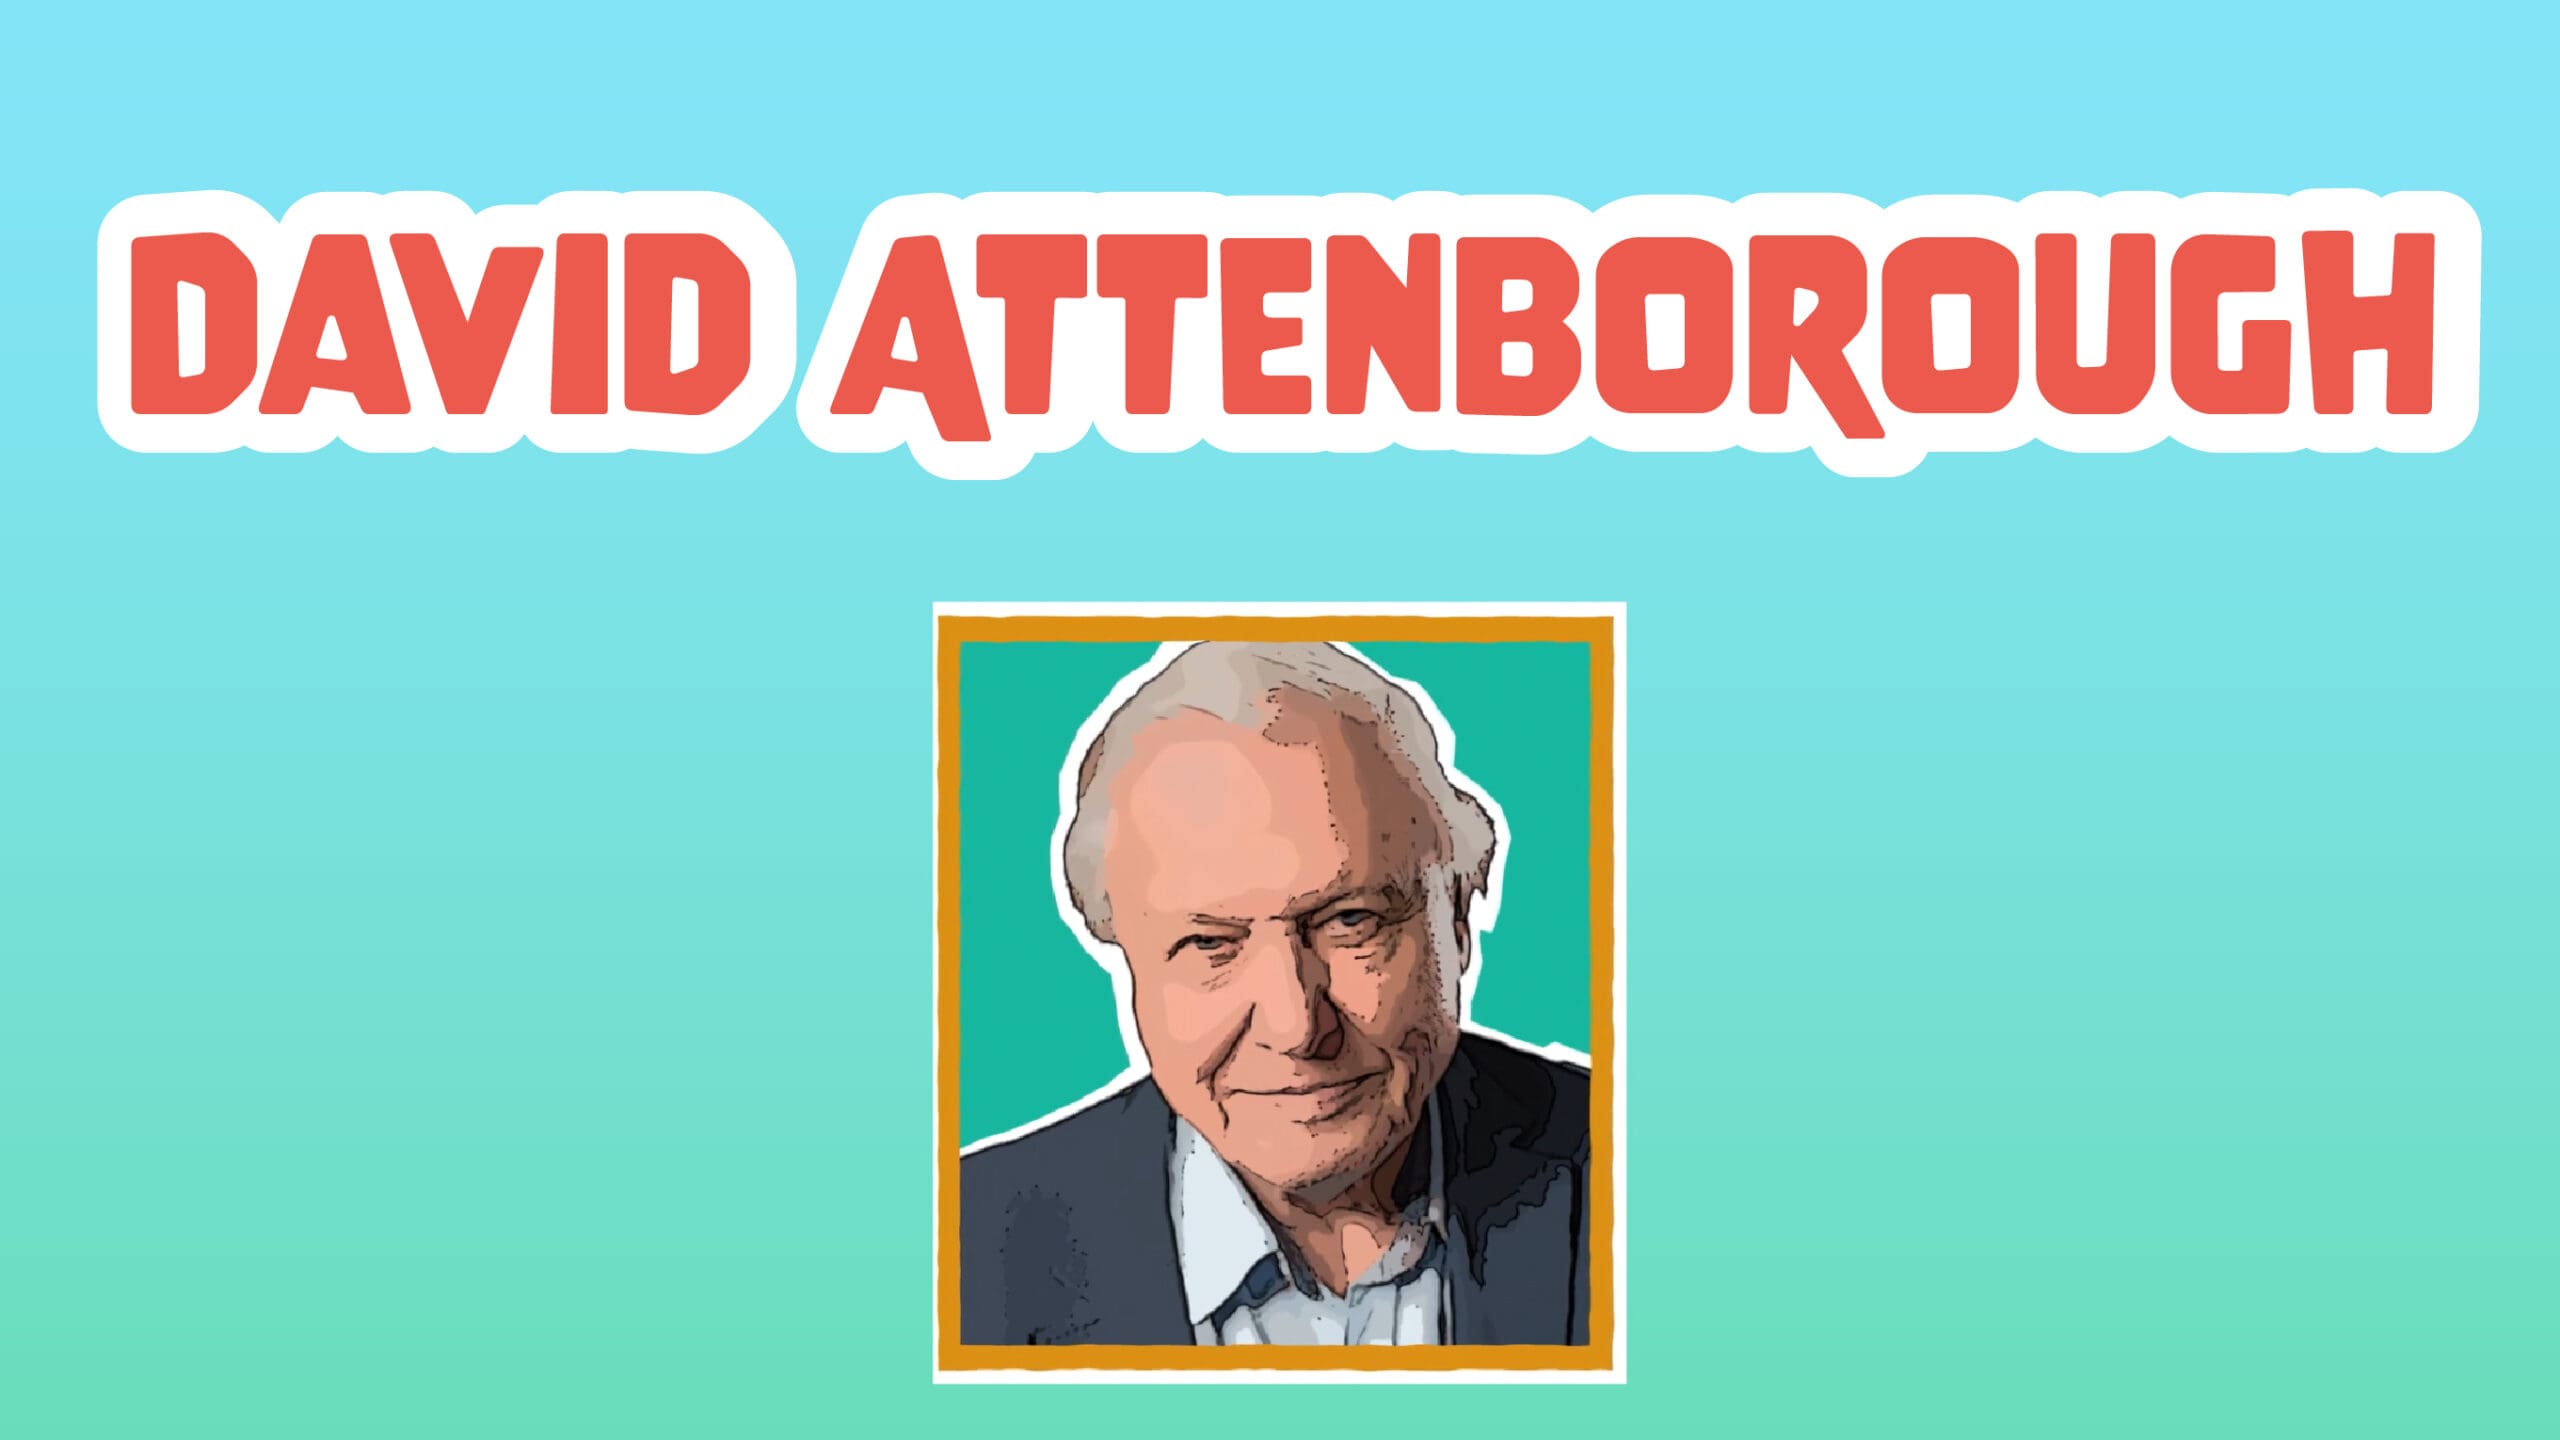 David Attenborough Facts for Kids – 5 Delightful Facts about David Attenborough